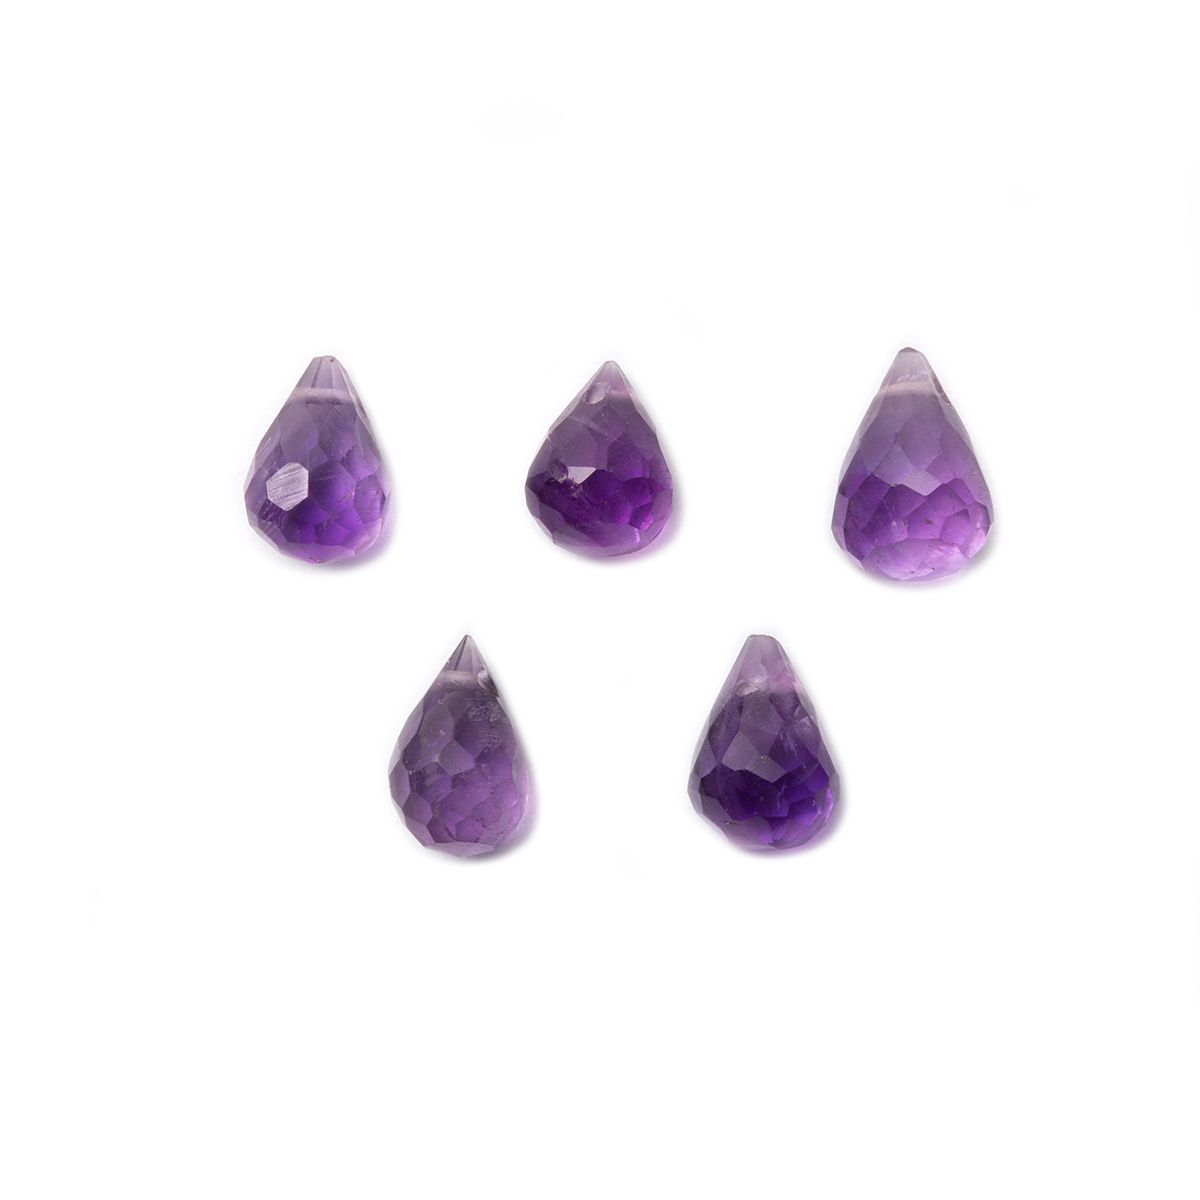 Amethyst Faceted Drop Briolette Beads - Approx 6x4mm, Pack Of 10 Beads